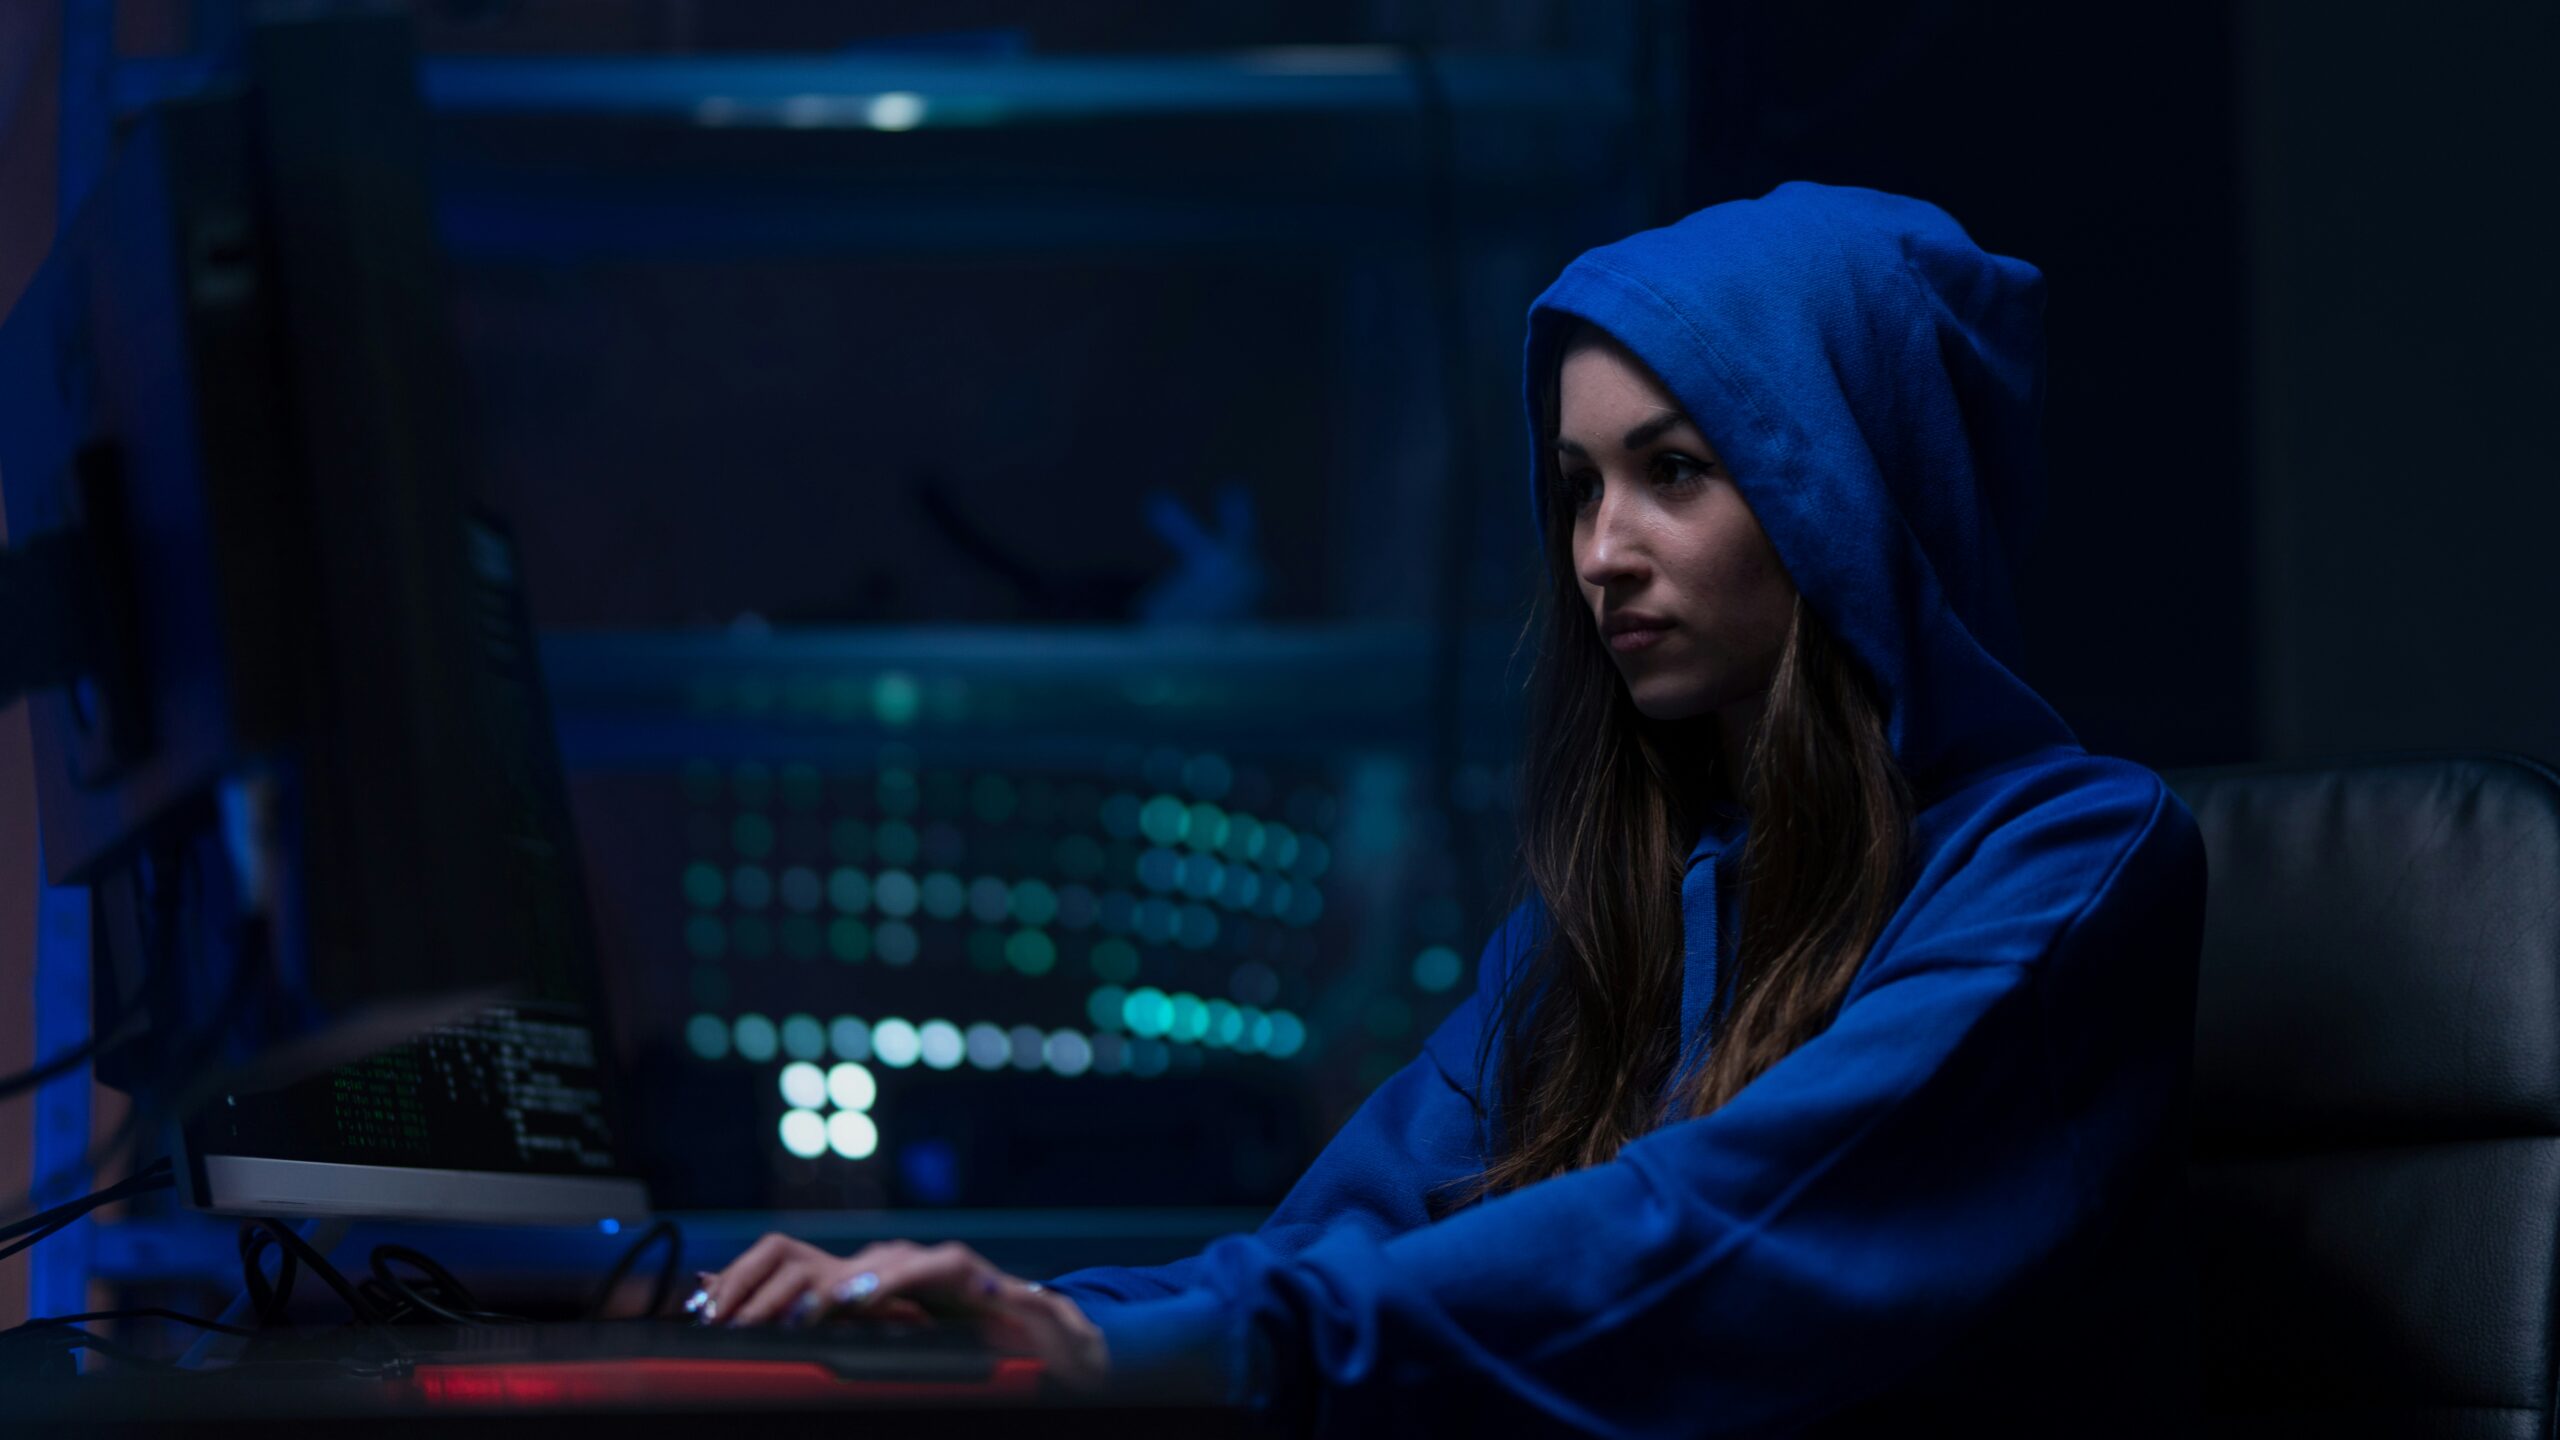 A girl in a blue hoodie sitting at a computer exploring vulnerabilities in computer systems.